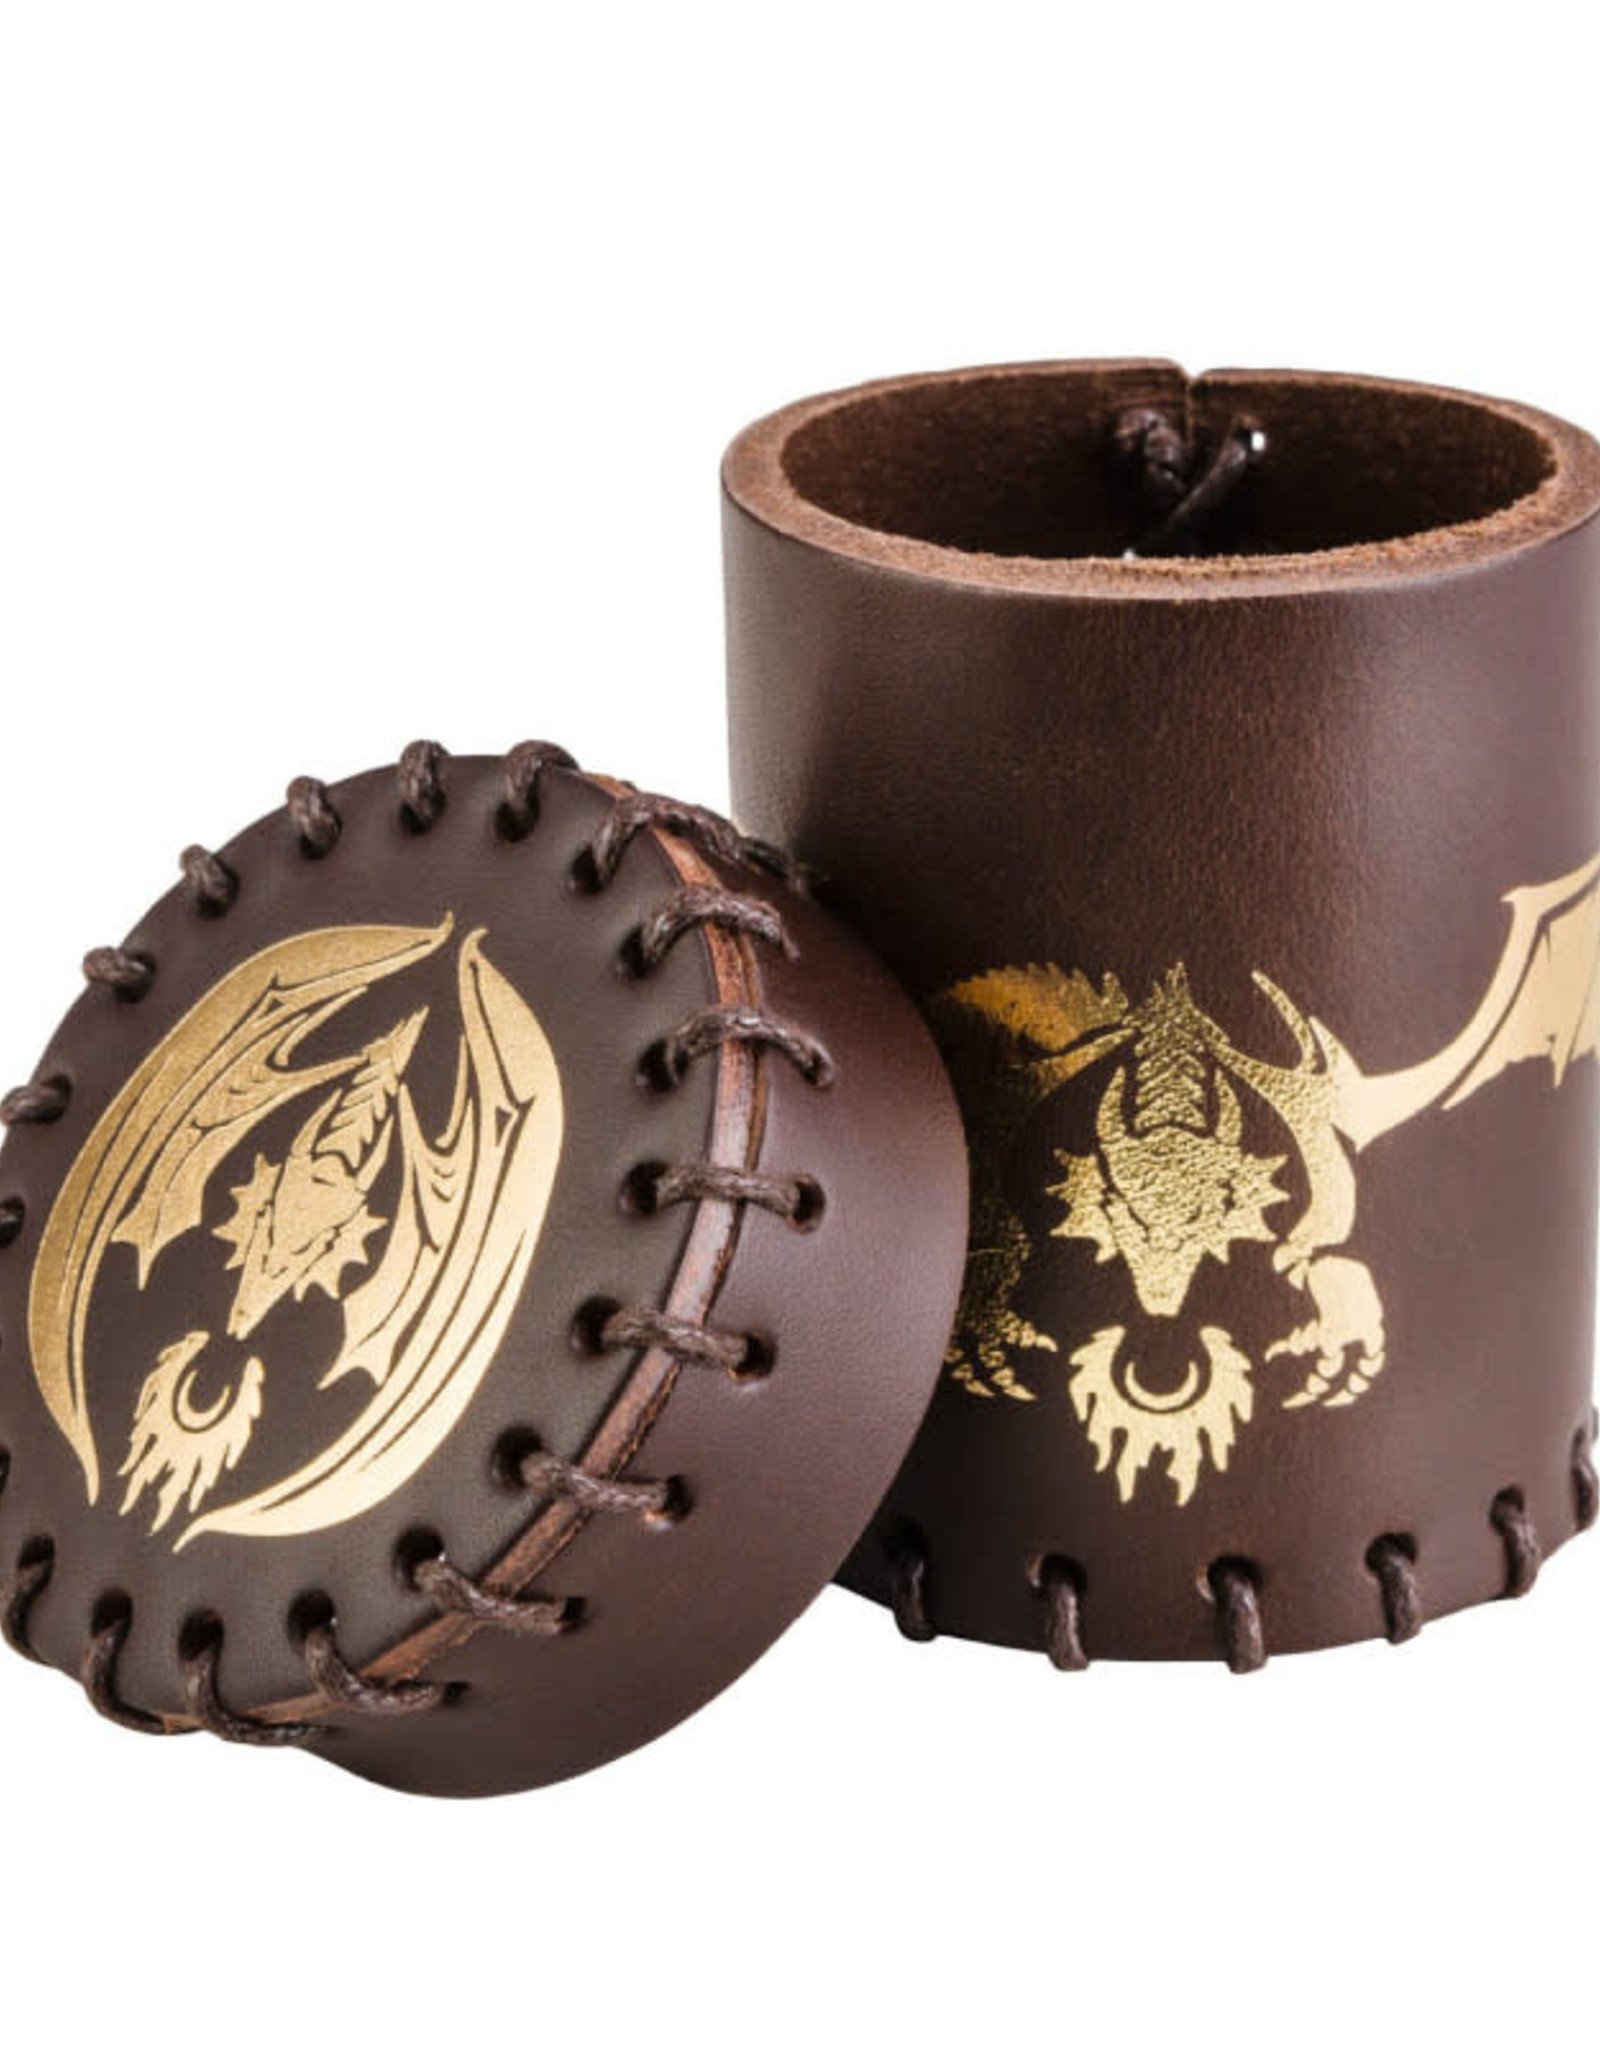 Q Workshop Dice Cup: Flying Dragon Brown/Golden Leather